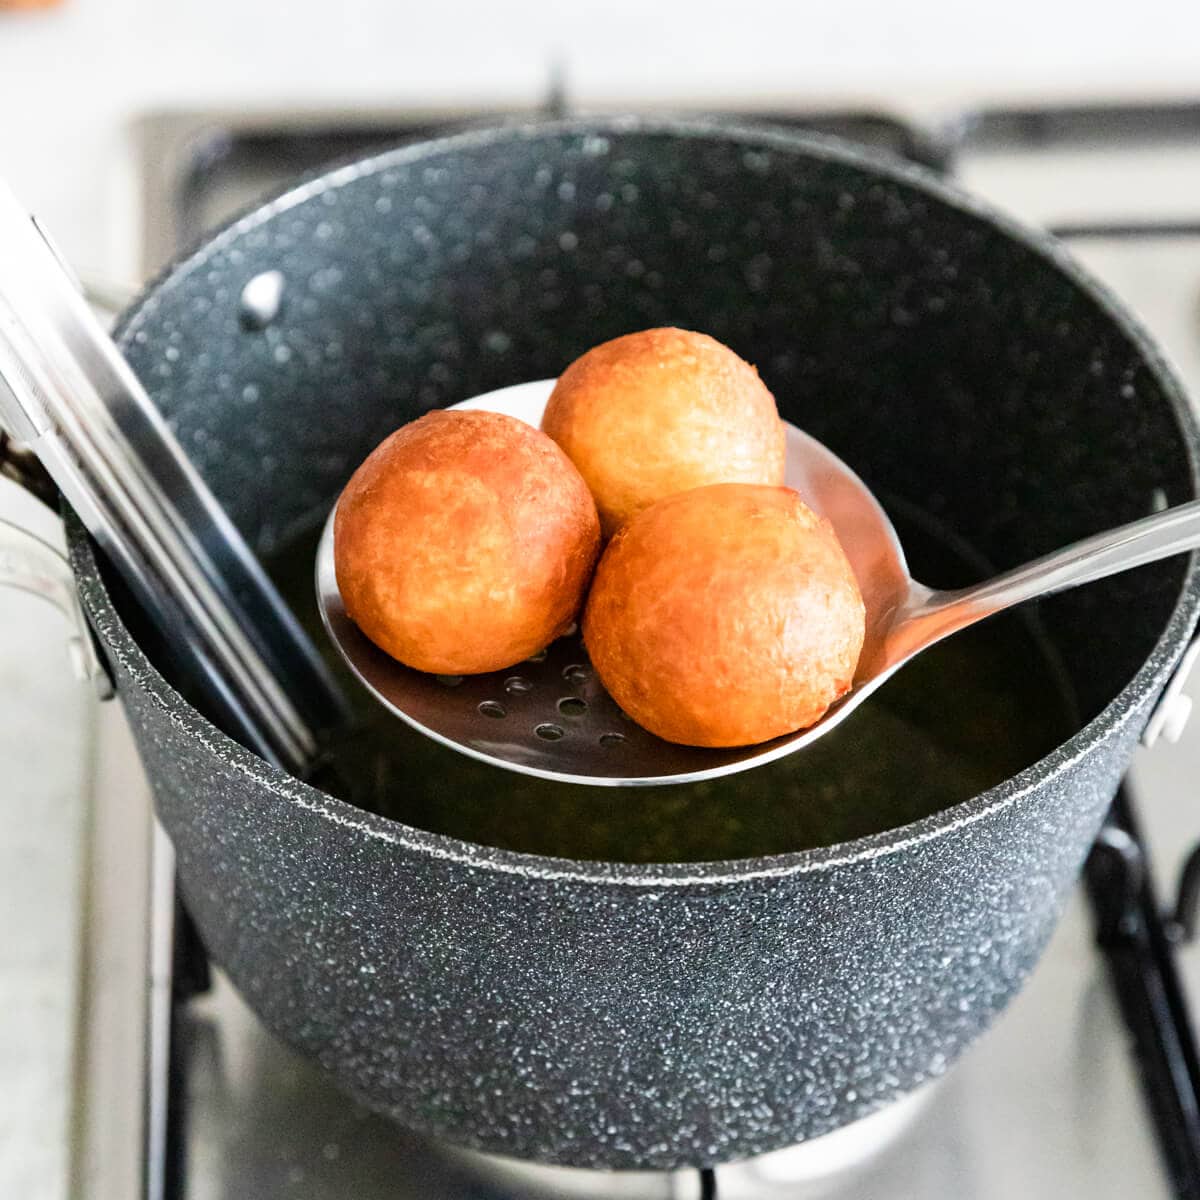 donut holes being taken out of the hot oil with slotted spoon.